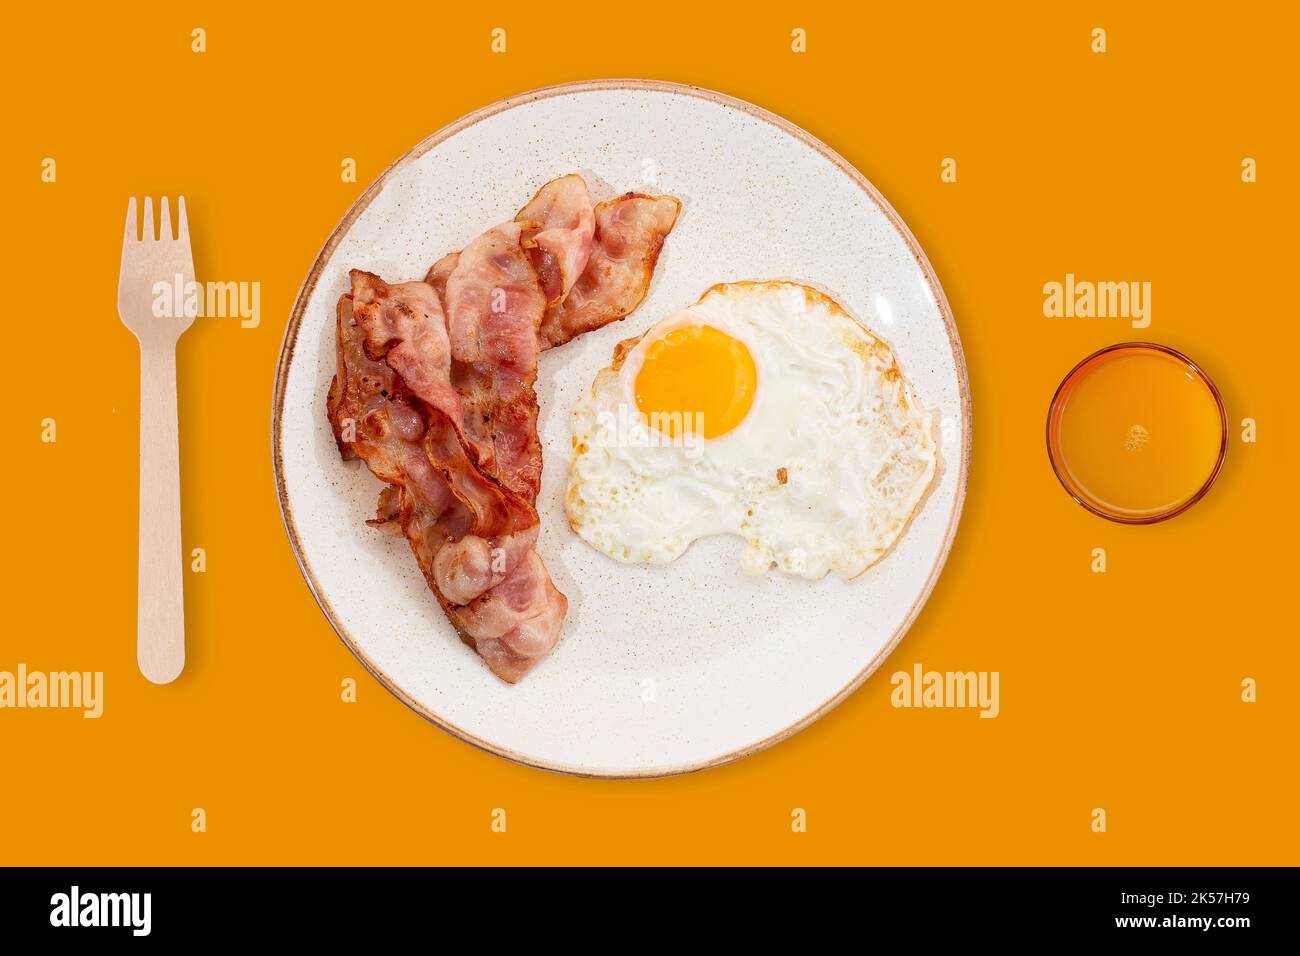 The best breakfast. Bacon, a fried egg, and orange juice. Photo on a summer yellow background. Place for text. Marketing and advertising idea. Modern Stock Photo